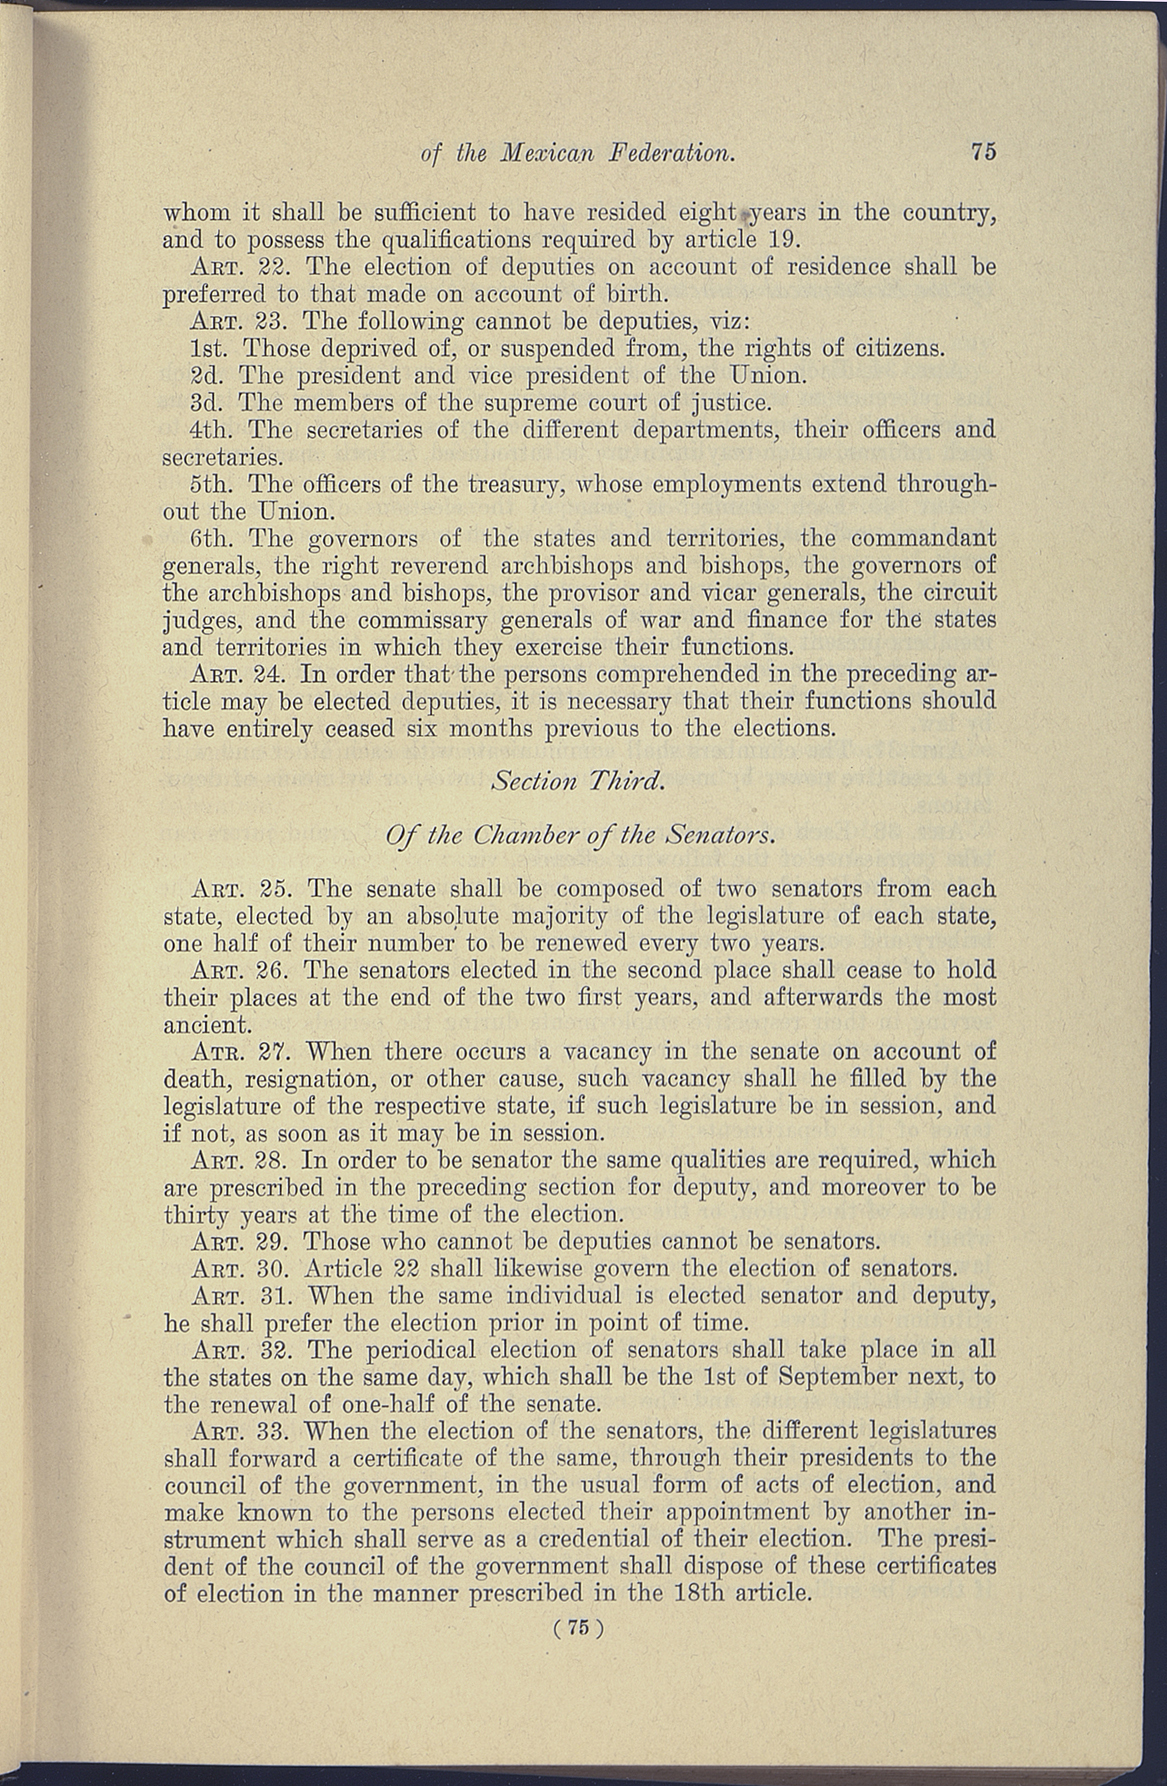 Title III, Section 2, Articles 21-24; Title III, Section 2, Articles 25-33